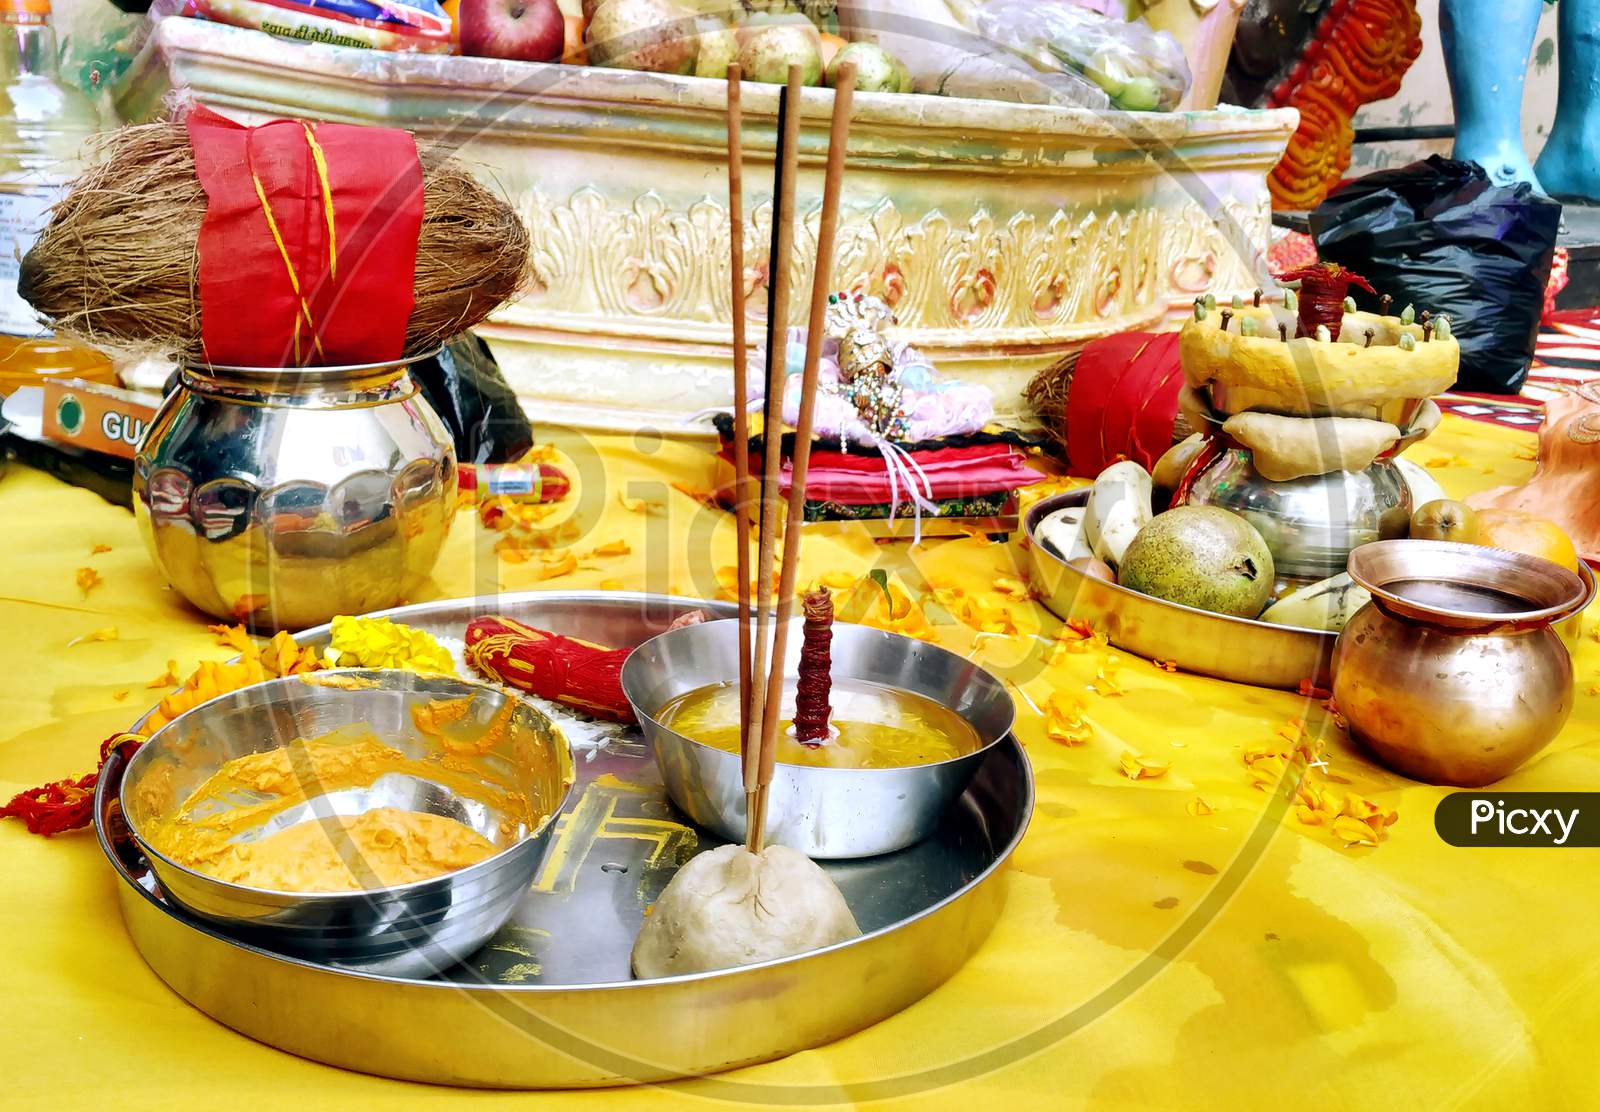 Beautifully Decorated Pooja Thali For Festival Celebration To Worship, Haldi Or Turmeric Powder And Kumkum, Flowers, Scented Sticks In Plate, Hindu Puja Thali